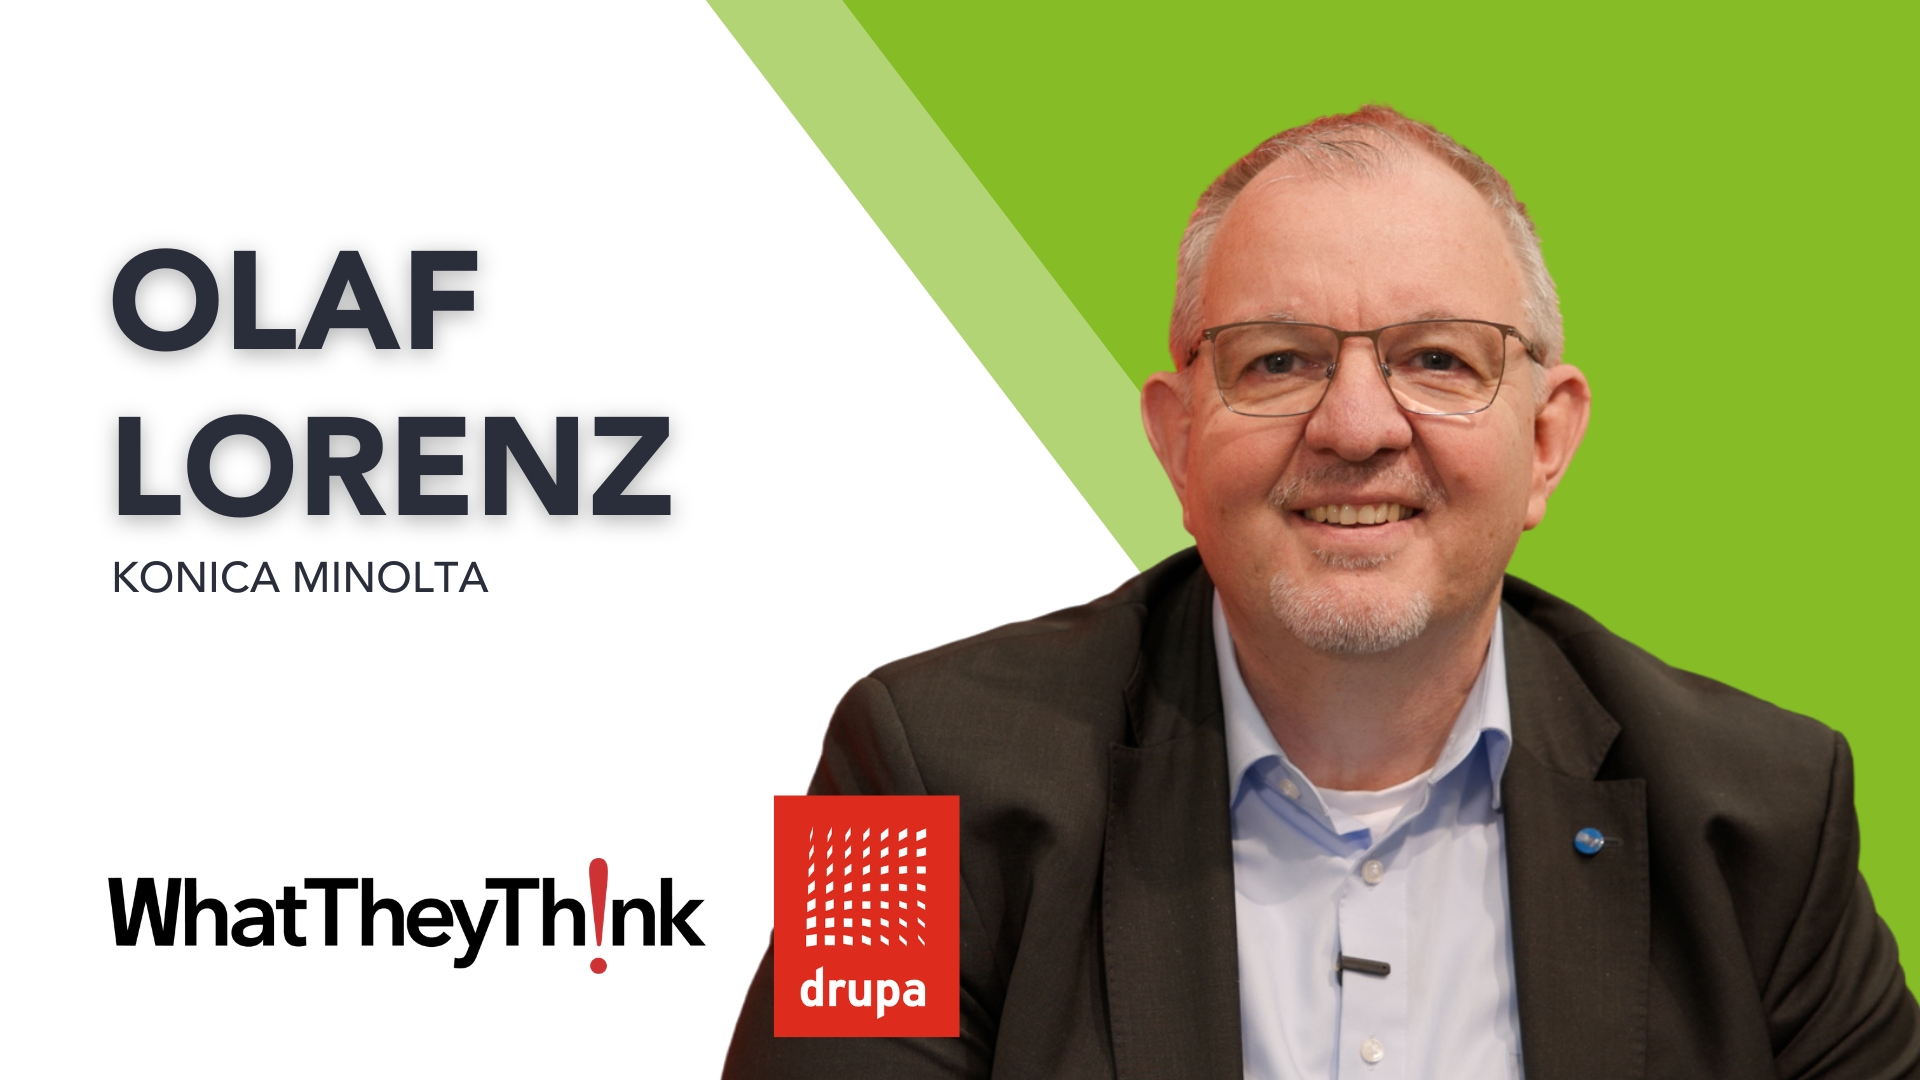 Konica Minolta's Innovations at drupa and Future Developments with Olaf Lorenz